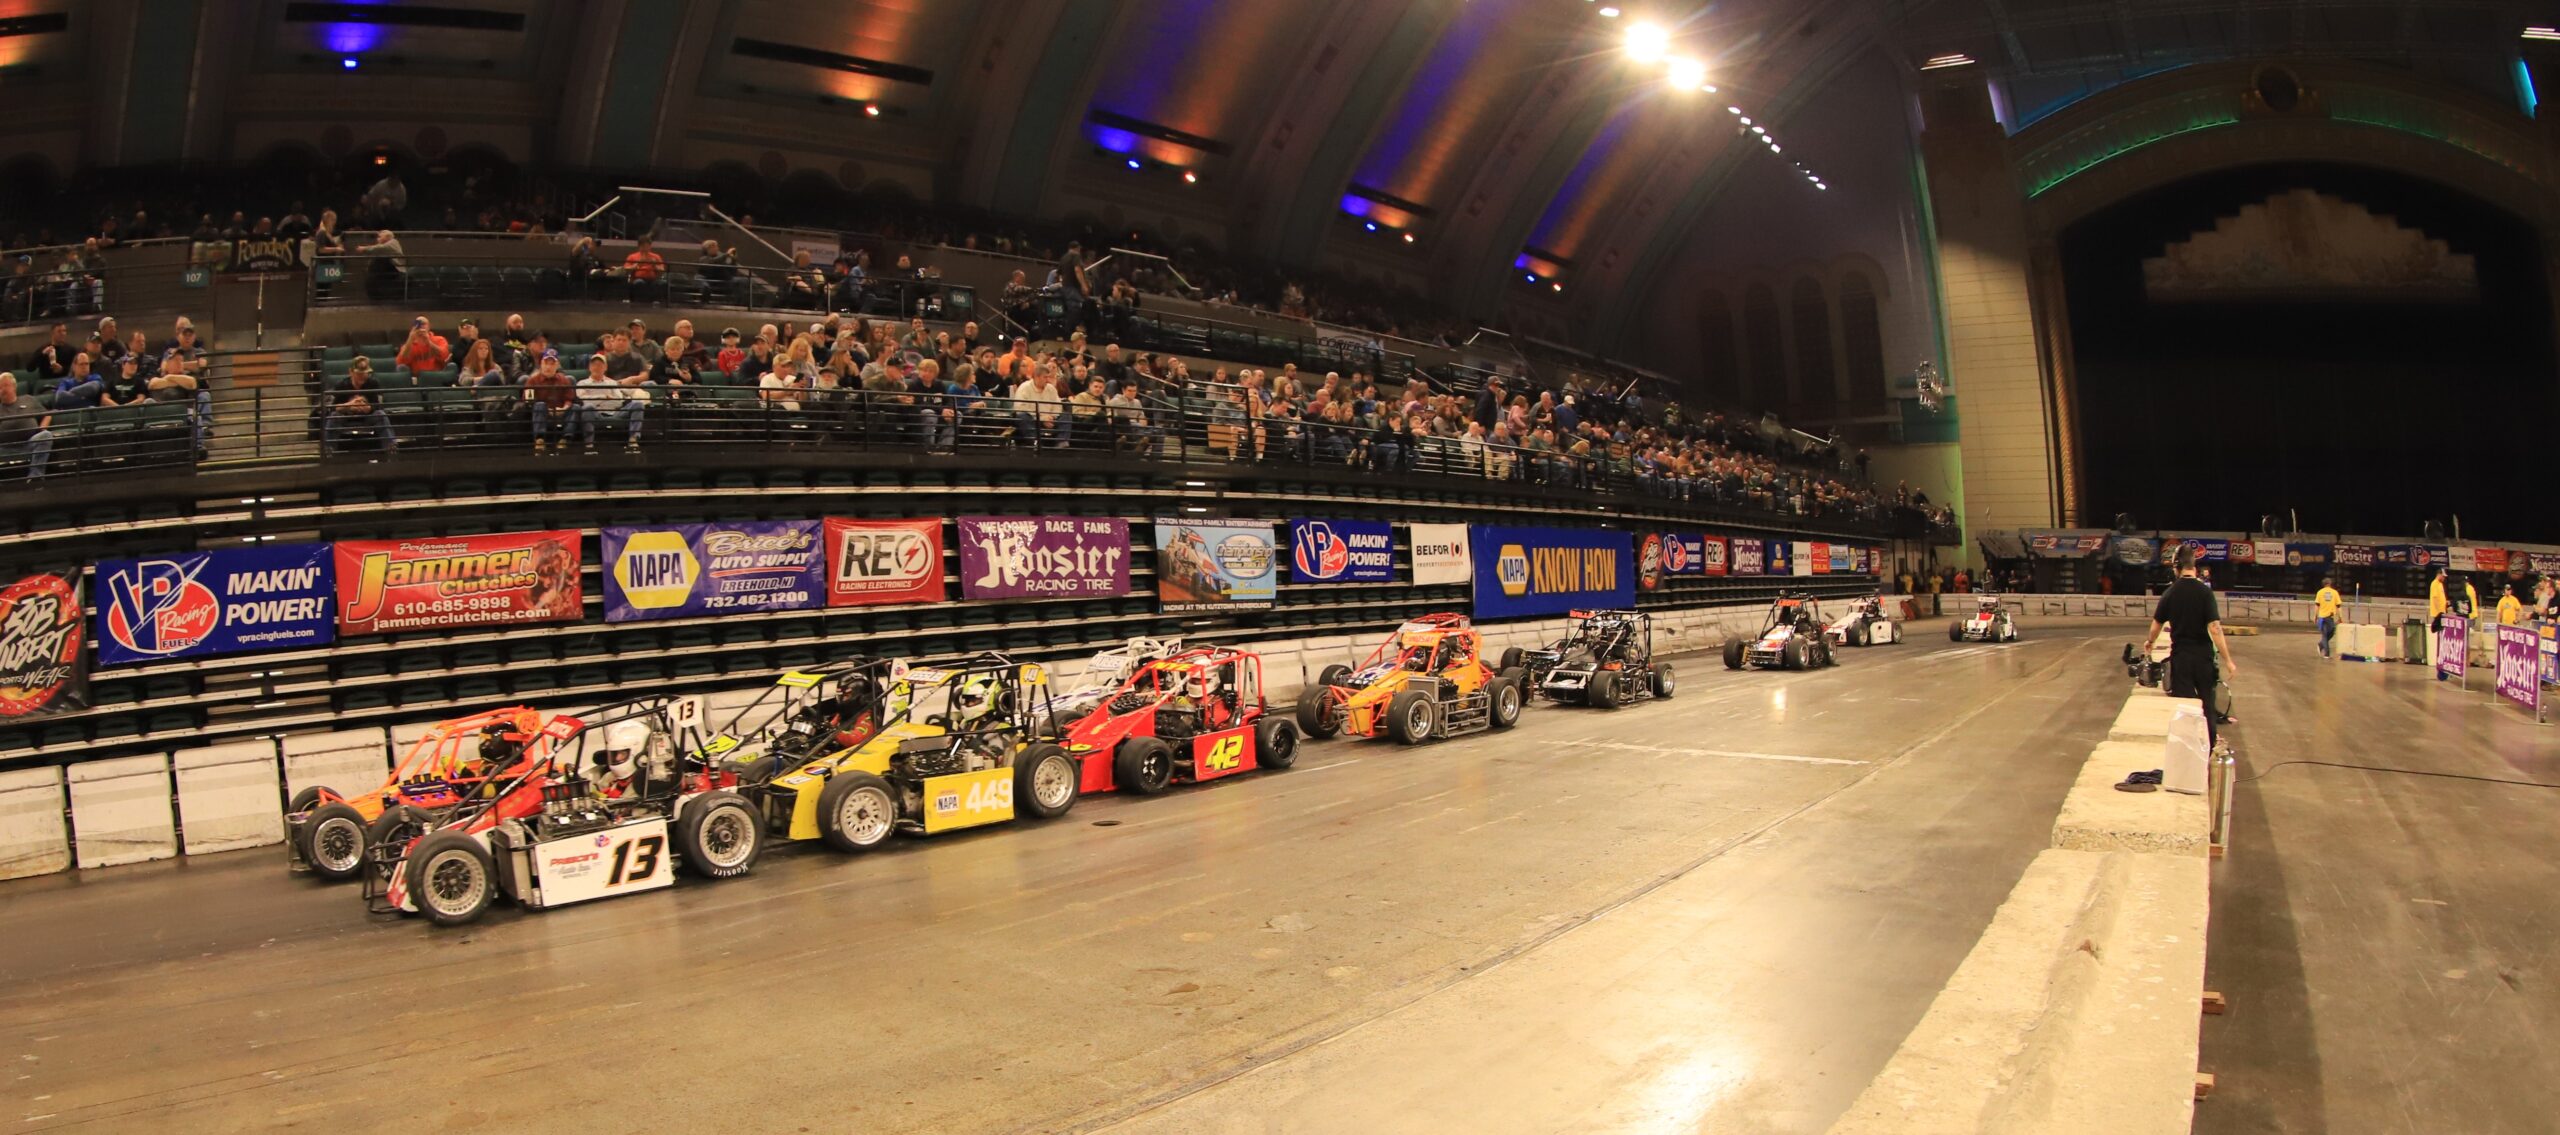 ATLANTIC CITY INDOOR AUTO RACING EVENTS CANCELLED FOR 2021